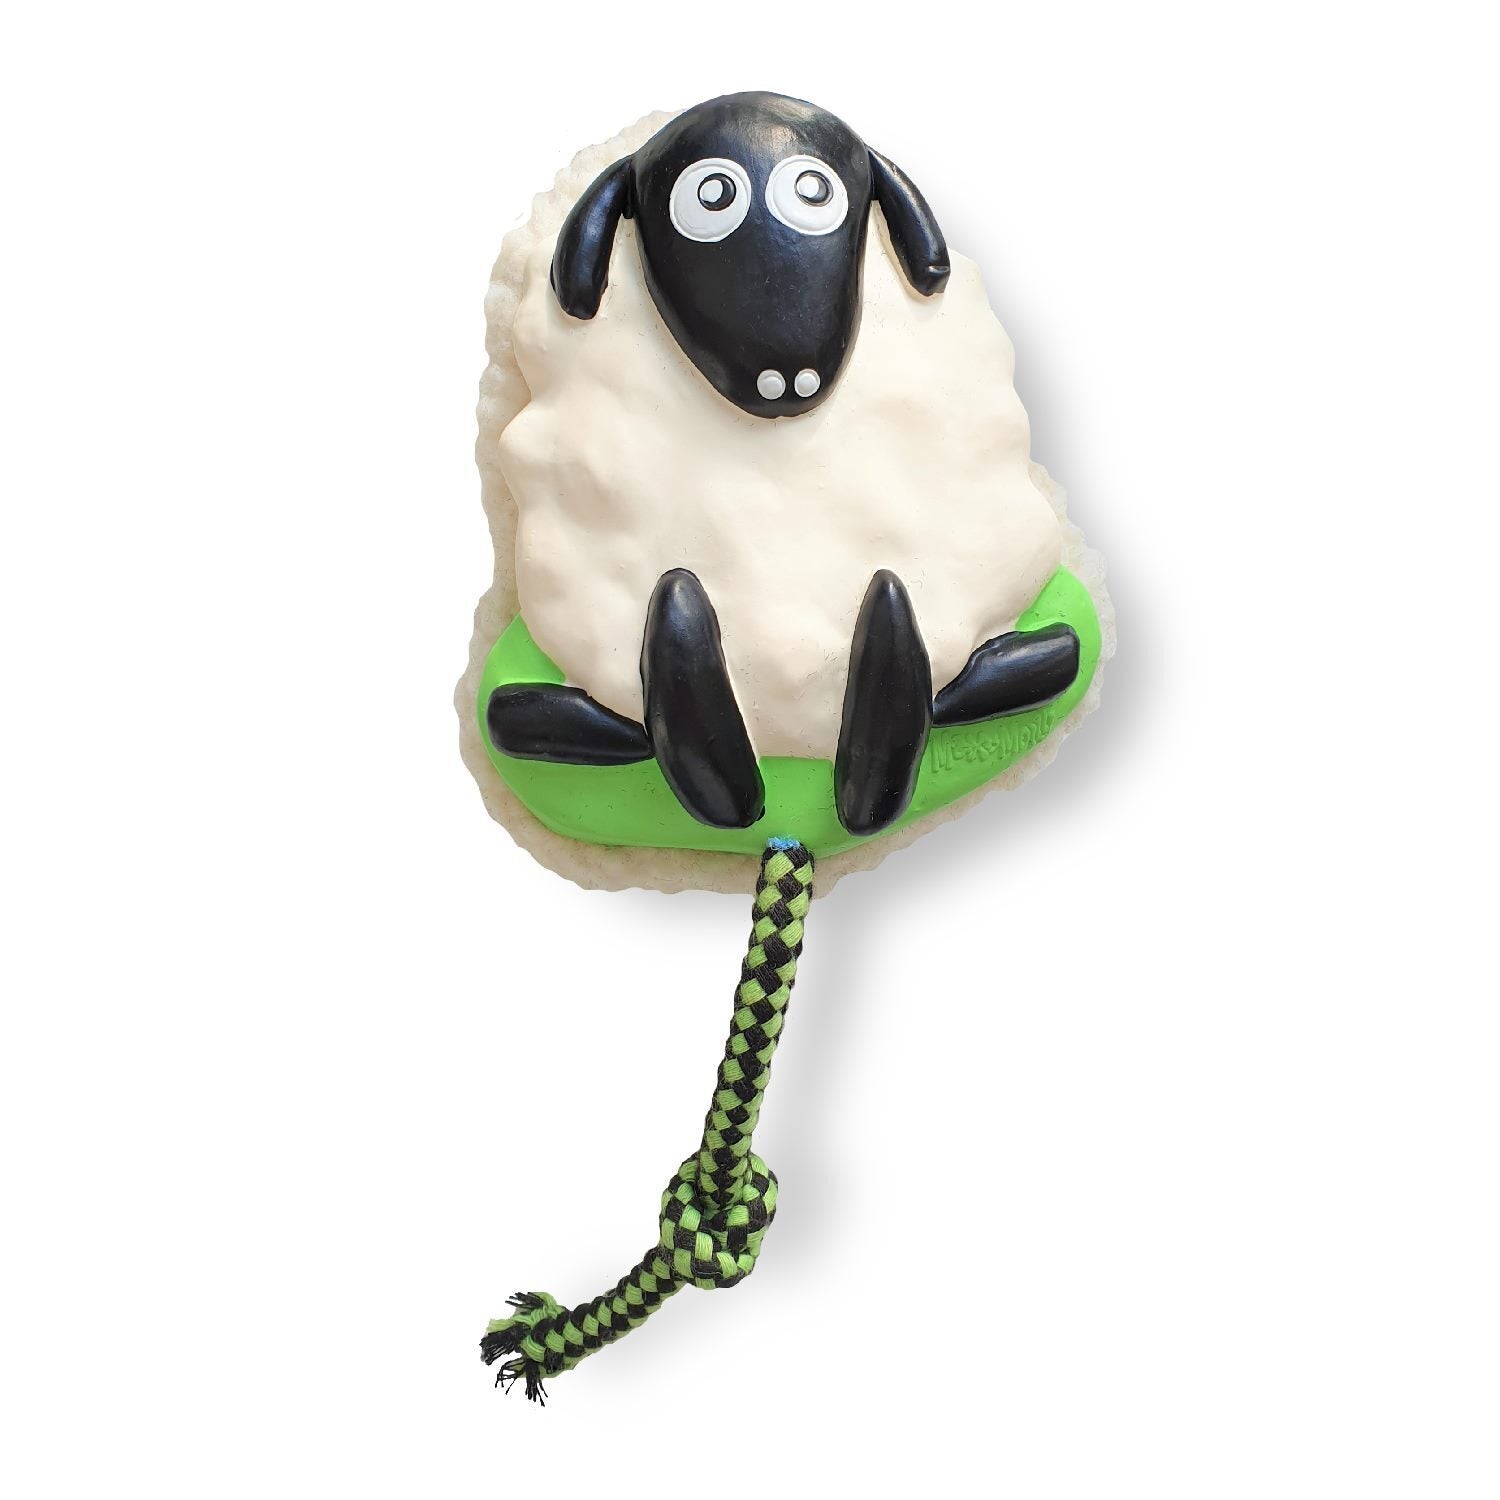 Max & Molly Squeaker Snuggles Dog Toy - Woody the Sheep - Pets and More